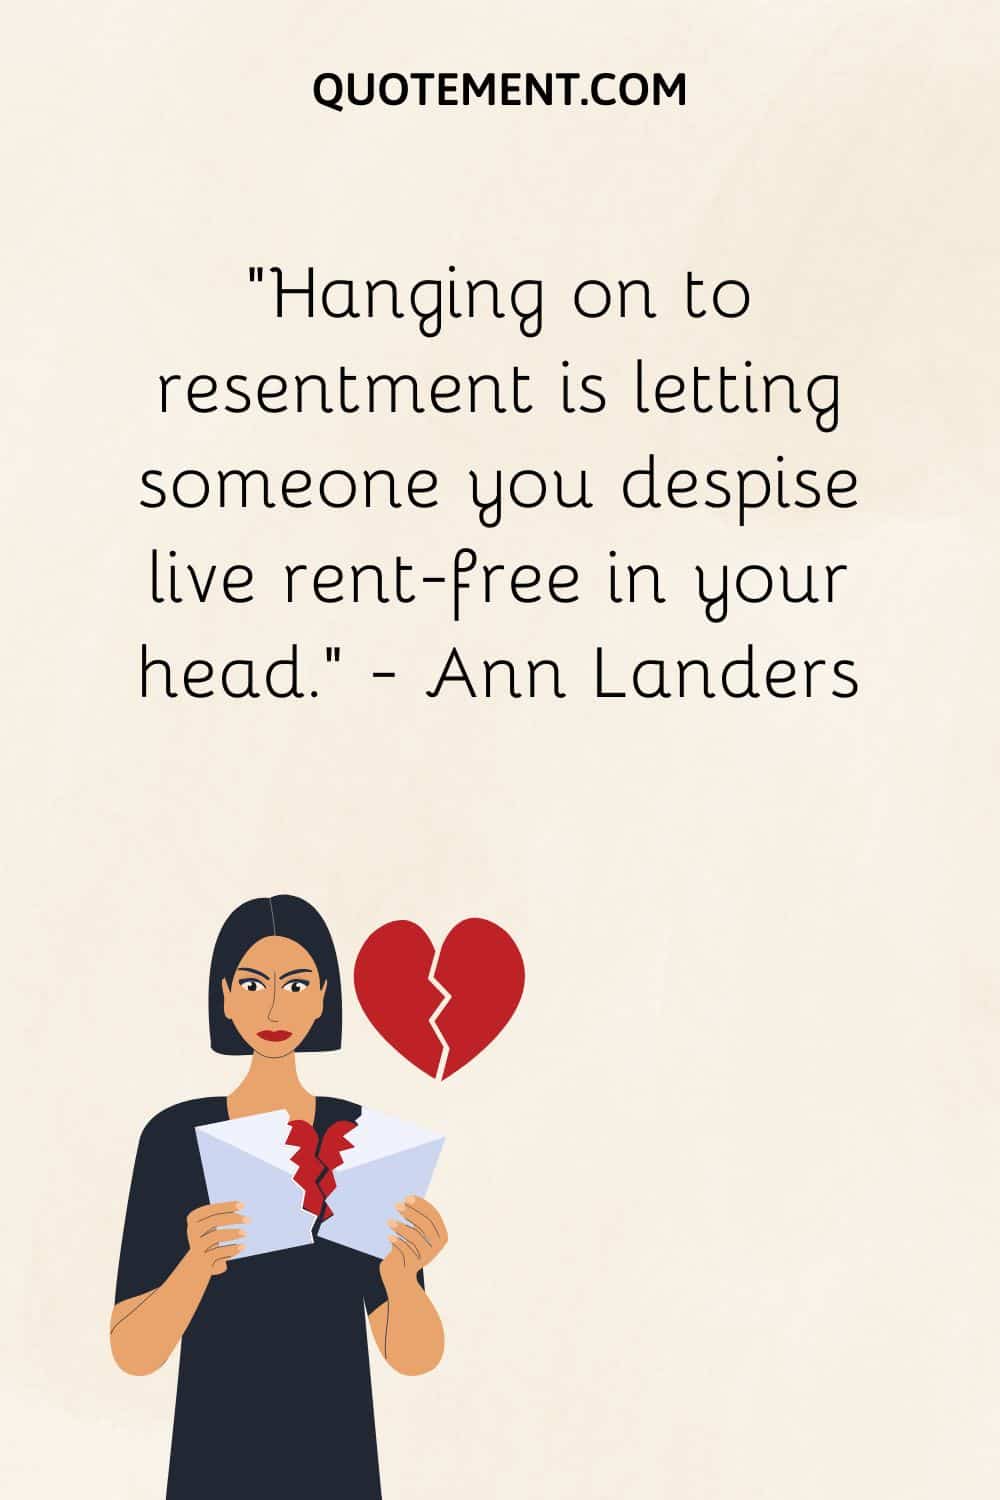 Hanging on to resentment is letting someone you despise live rent-free in your head